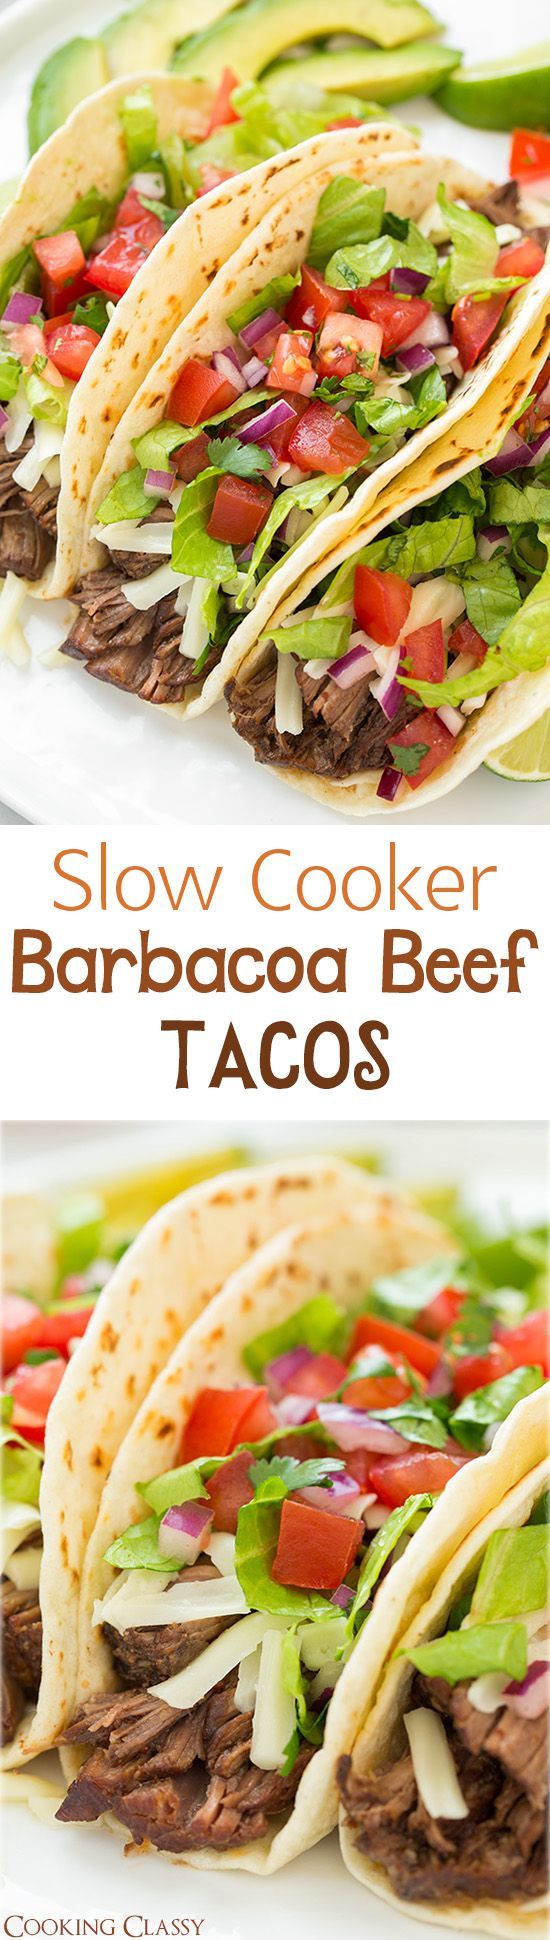 Slow Cooker Barbacoa Beef Tacos (Chipotle Copycat) – these are unbelievably delicious! My husband said the